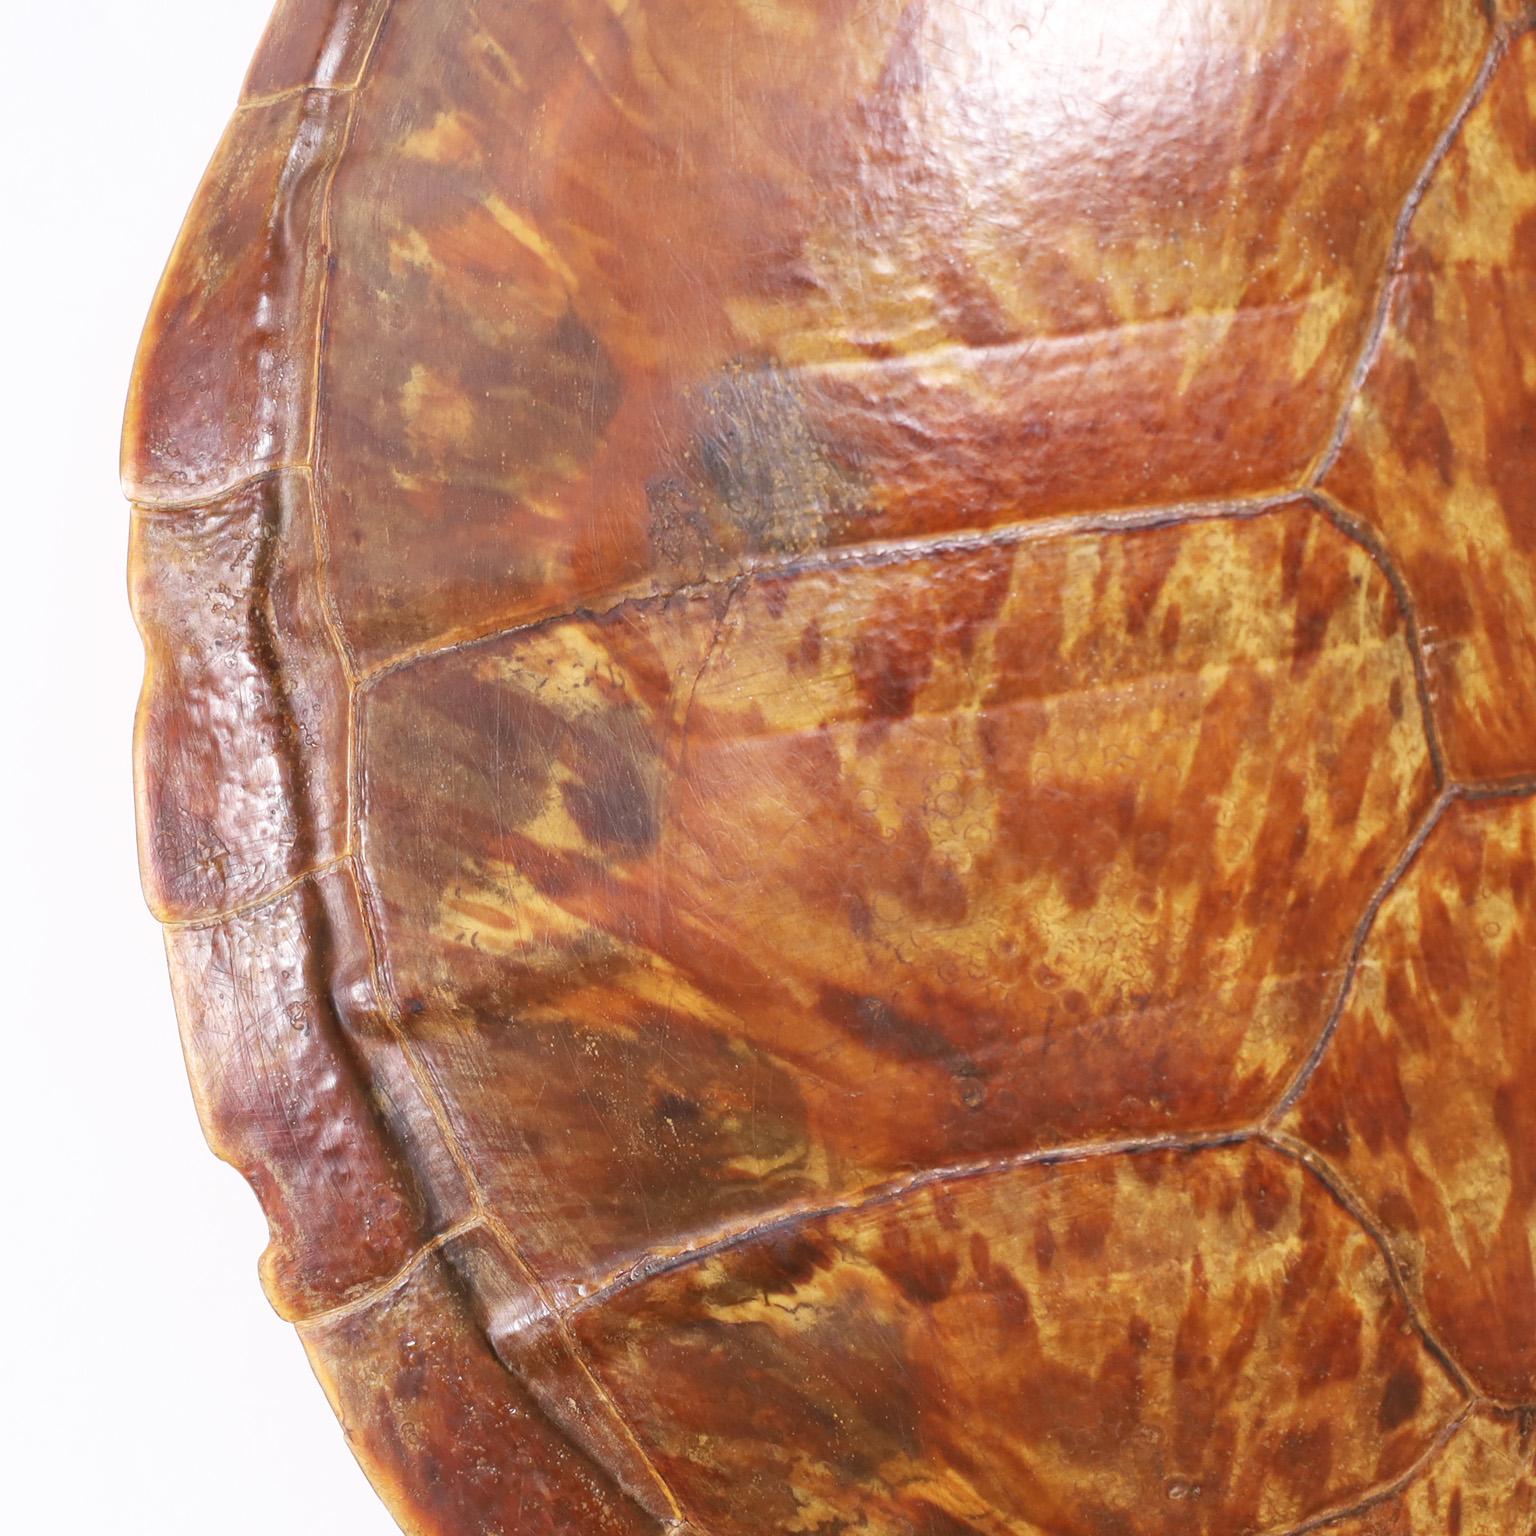 Polished Antique Turtle Shell or Carapace